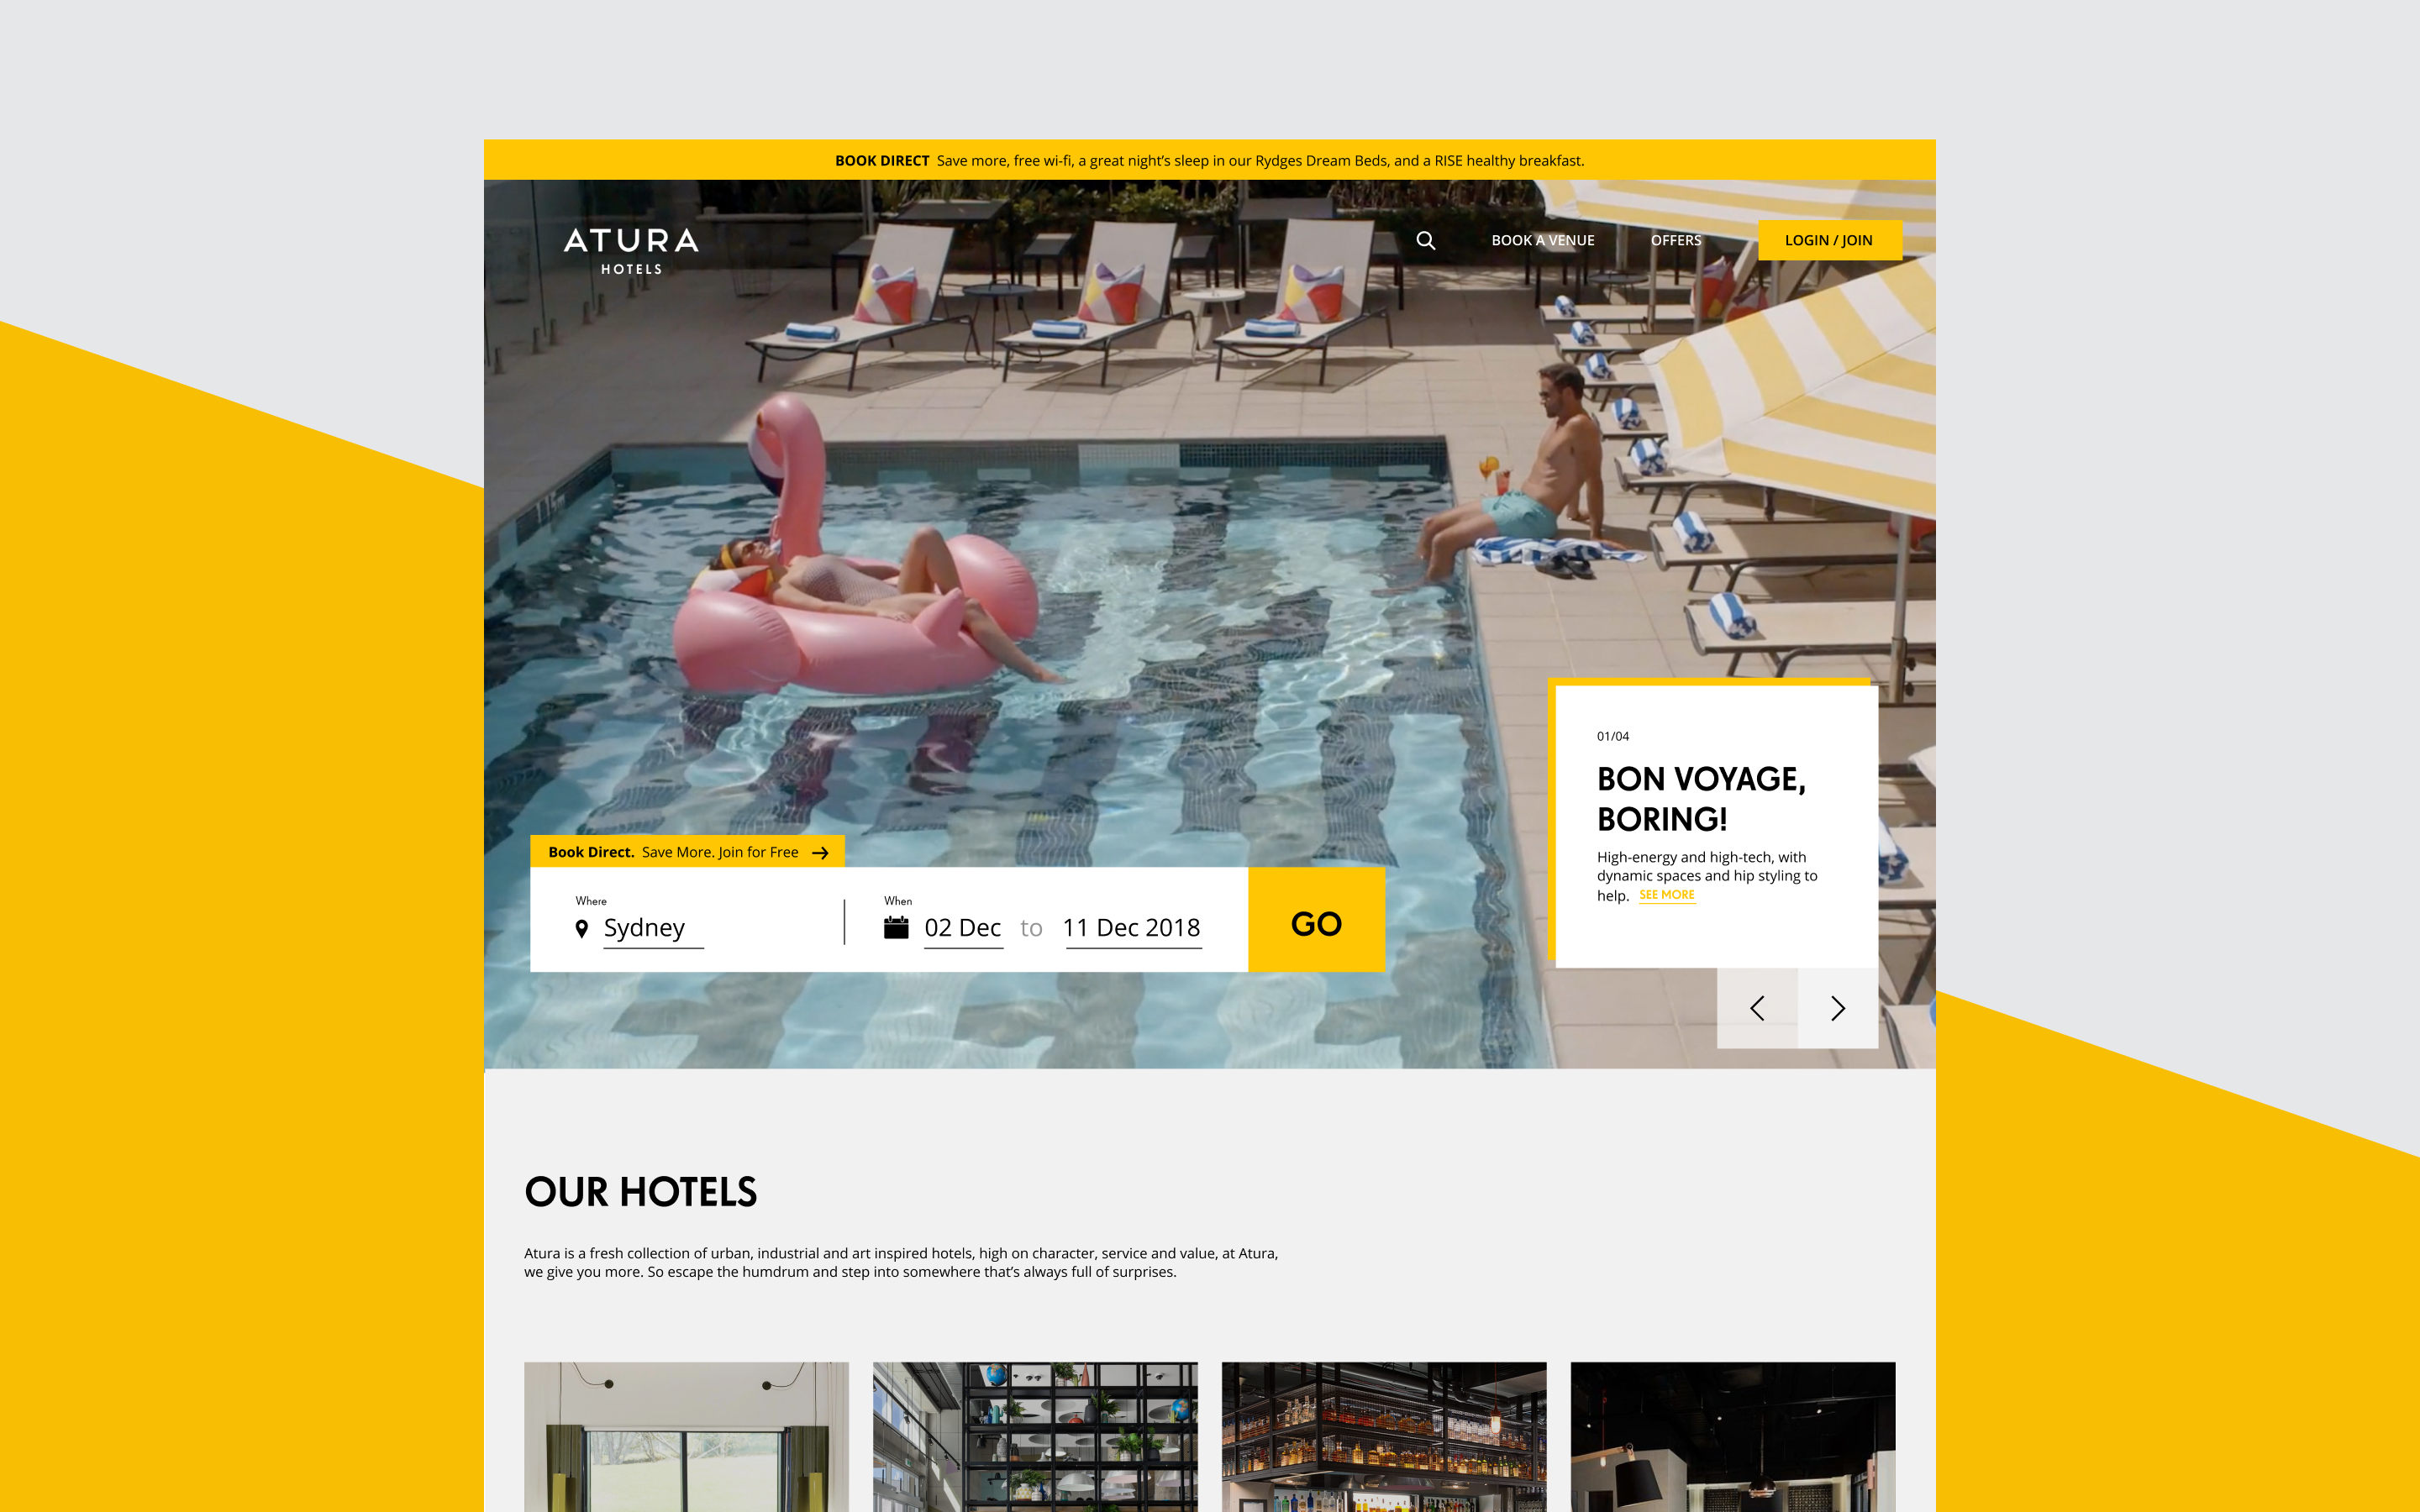 EVENT Atura new website design, featuring a clear information hierarchy and large booking CTA